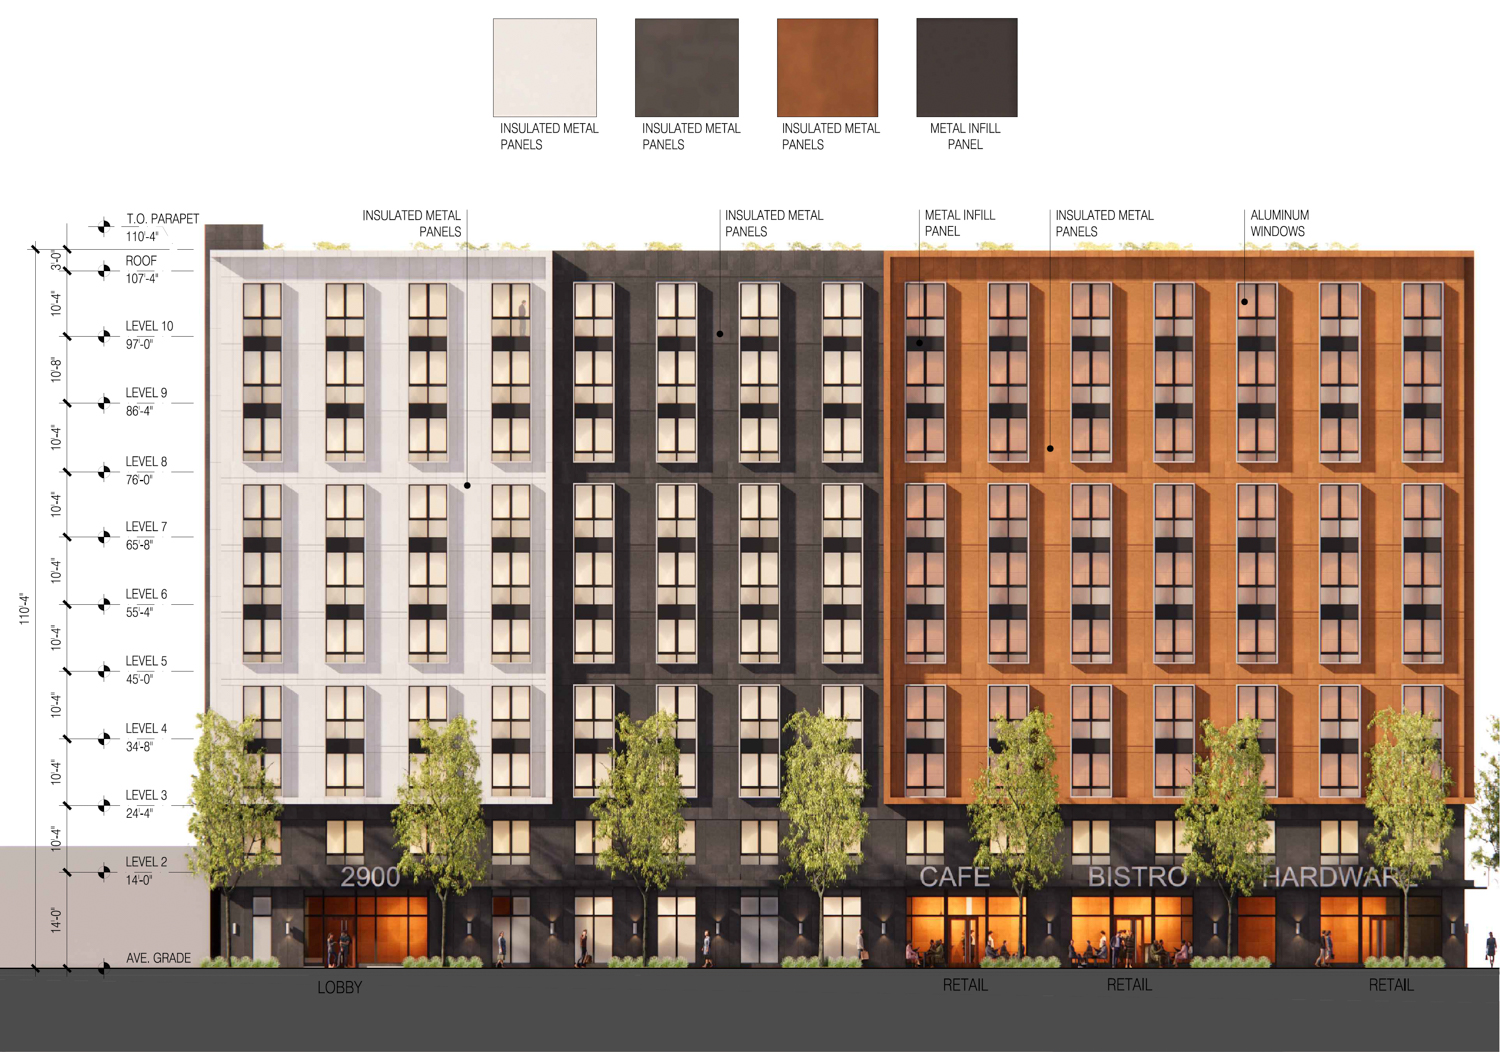 2900 Shattuck Avenue east elevation with facade materials labeled, image by Trachtenberg Architects